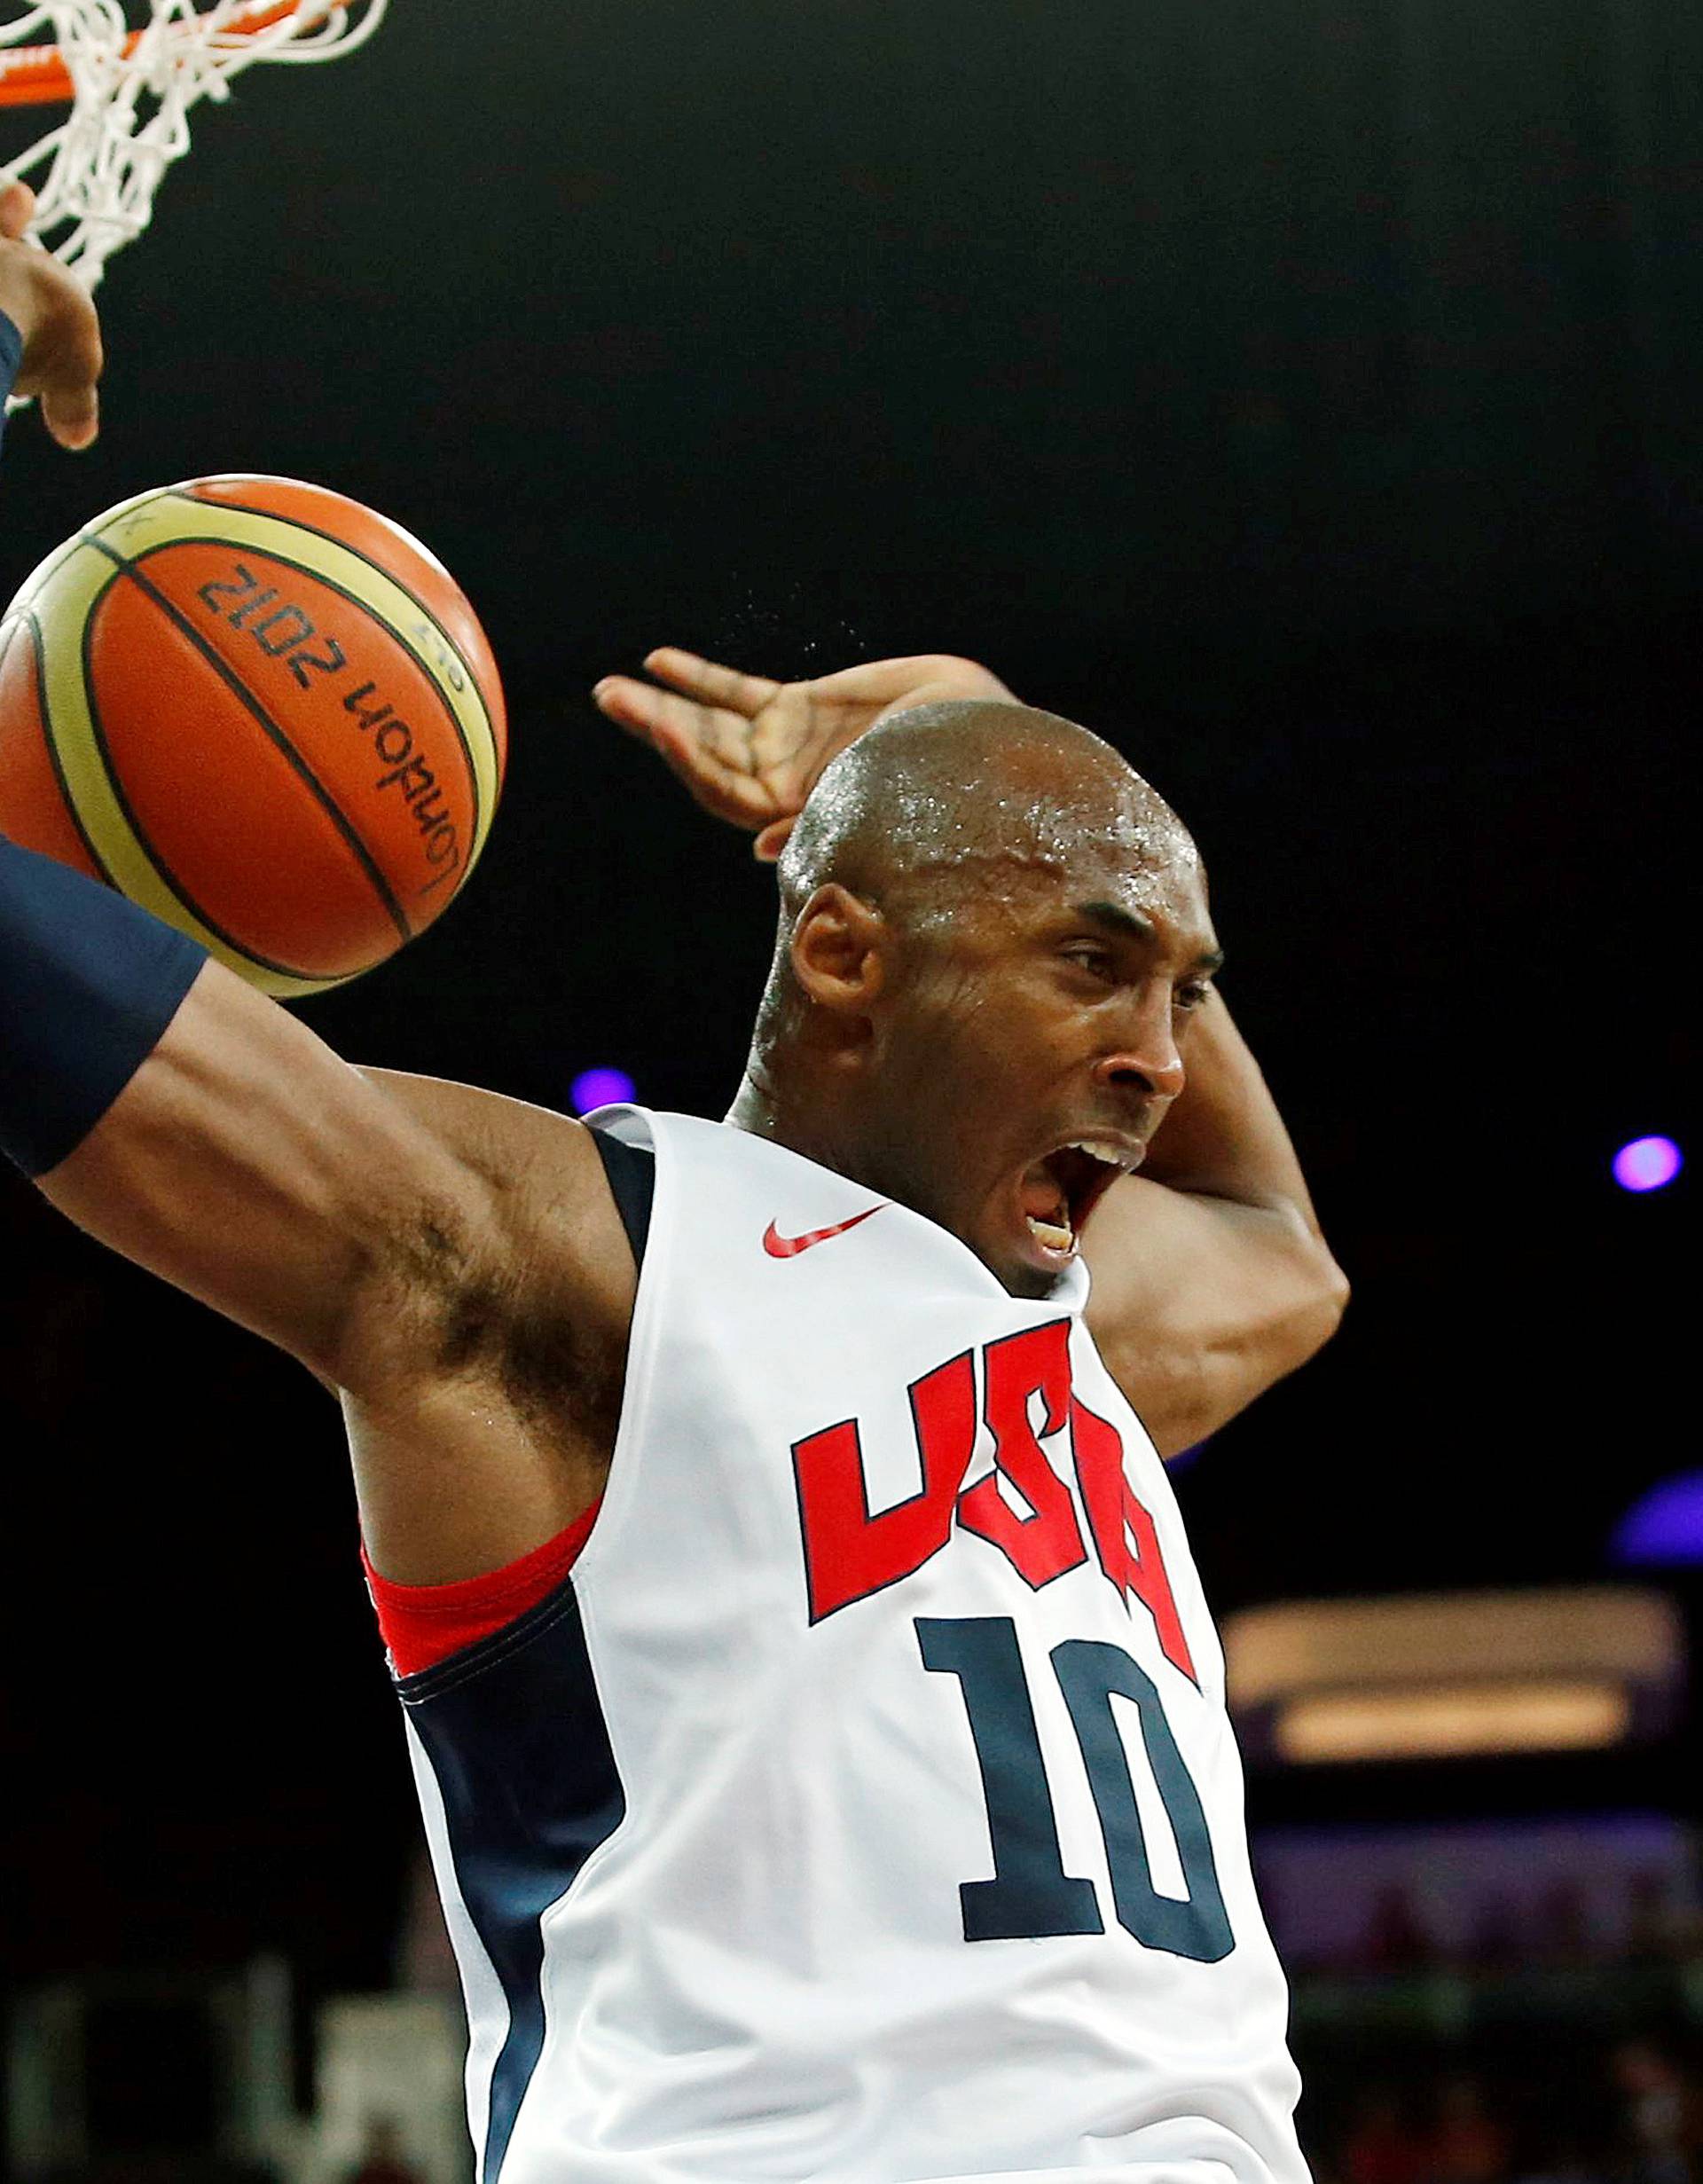 FILE PHOTO: Bryant of the U.S. dunks against Spain during their men's gold medal  basketball match at the North Greenwich Arena in London during the London 2012 Olympic Games